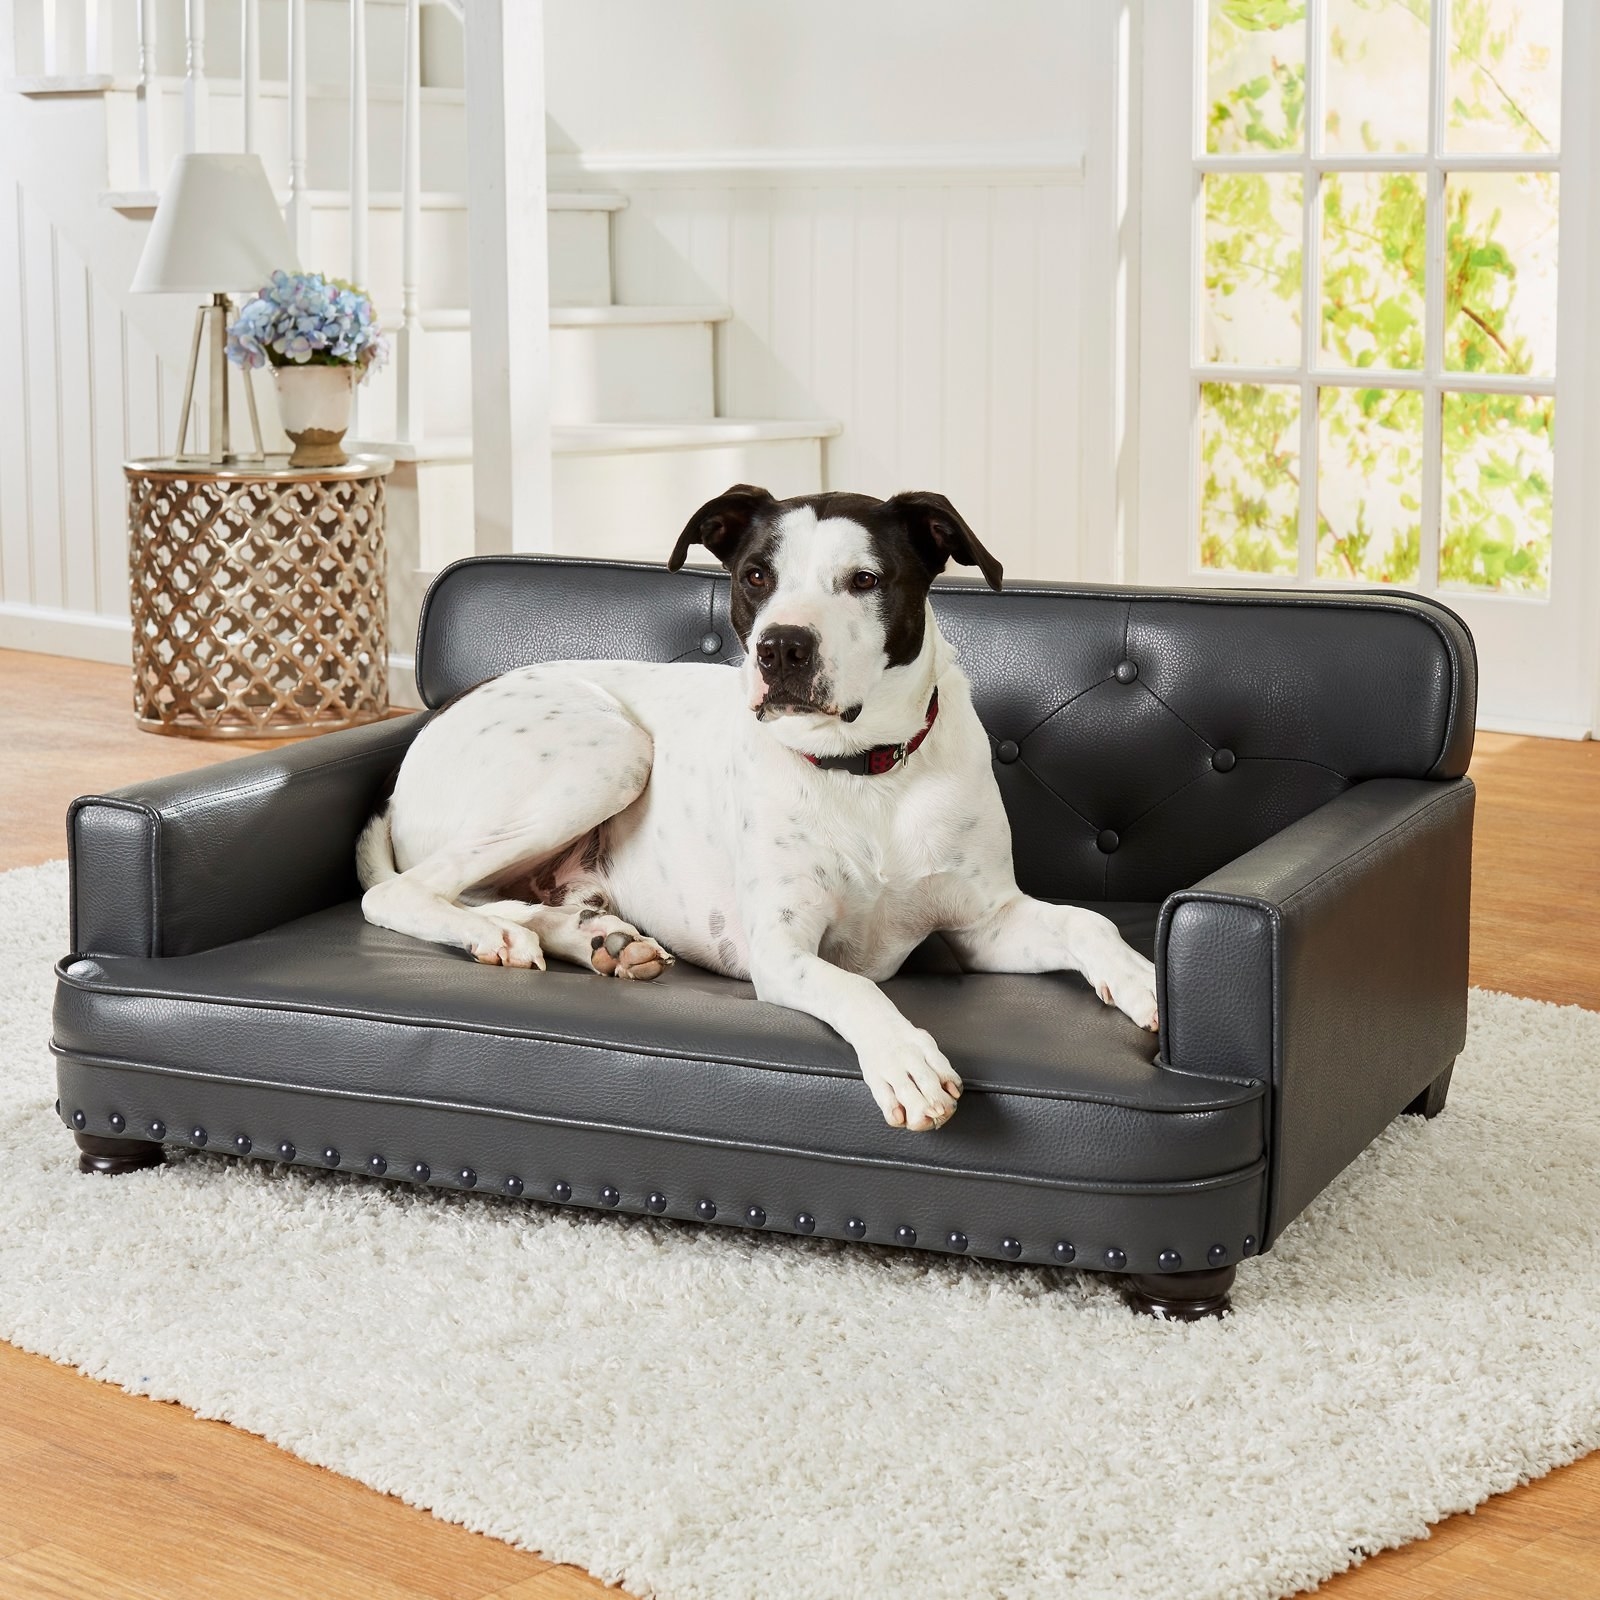 miniature couch for dogs